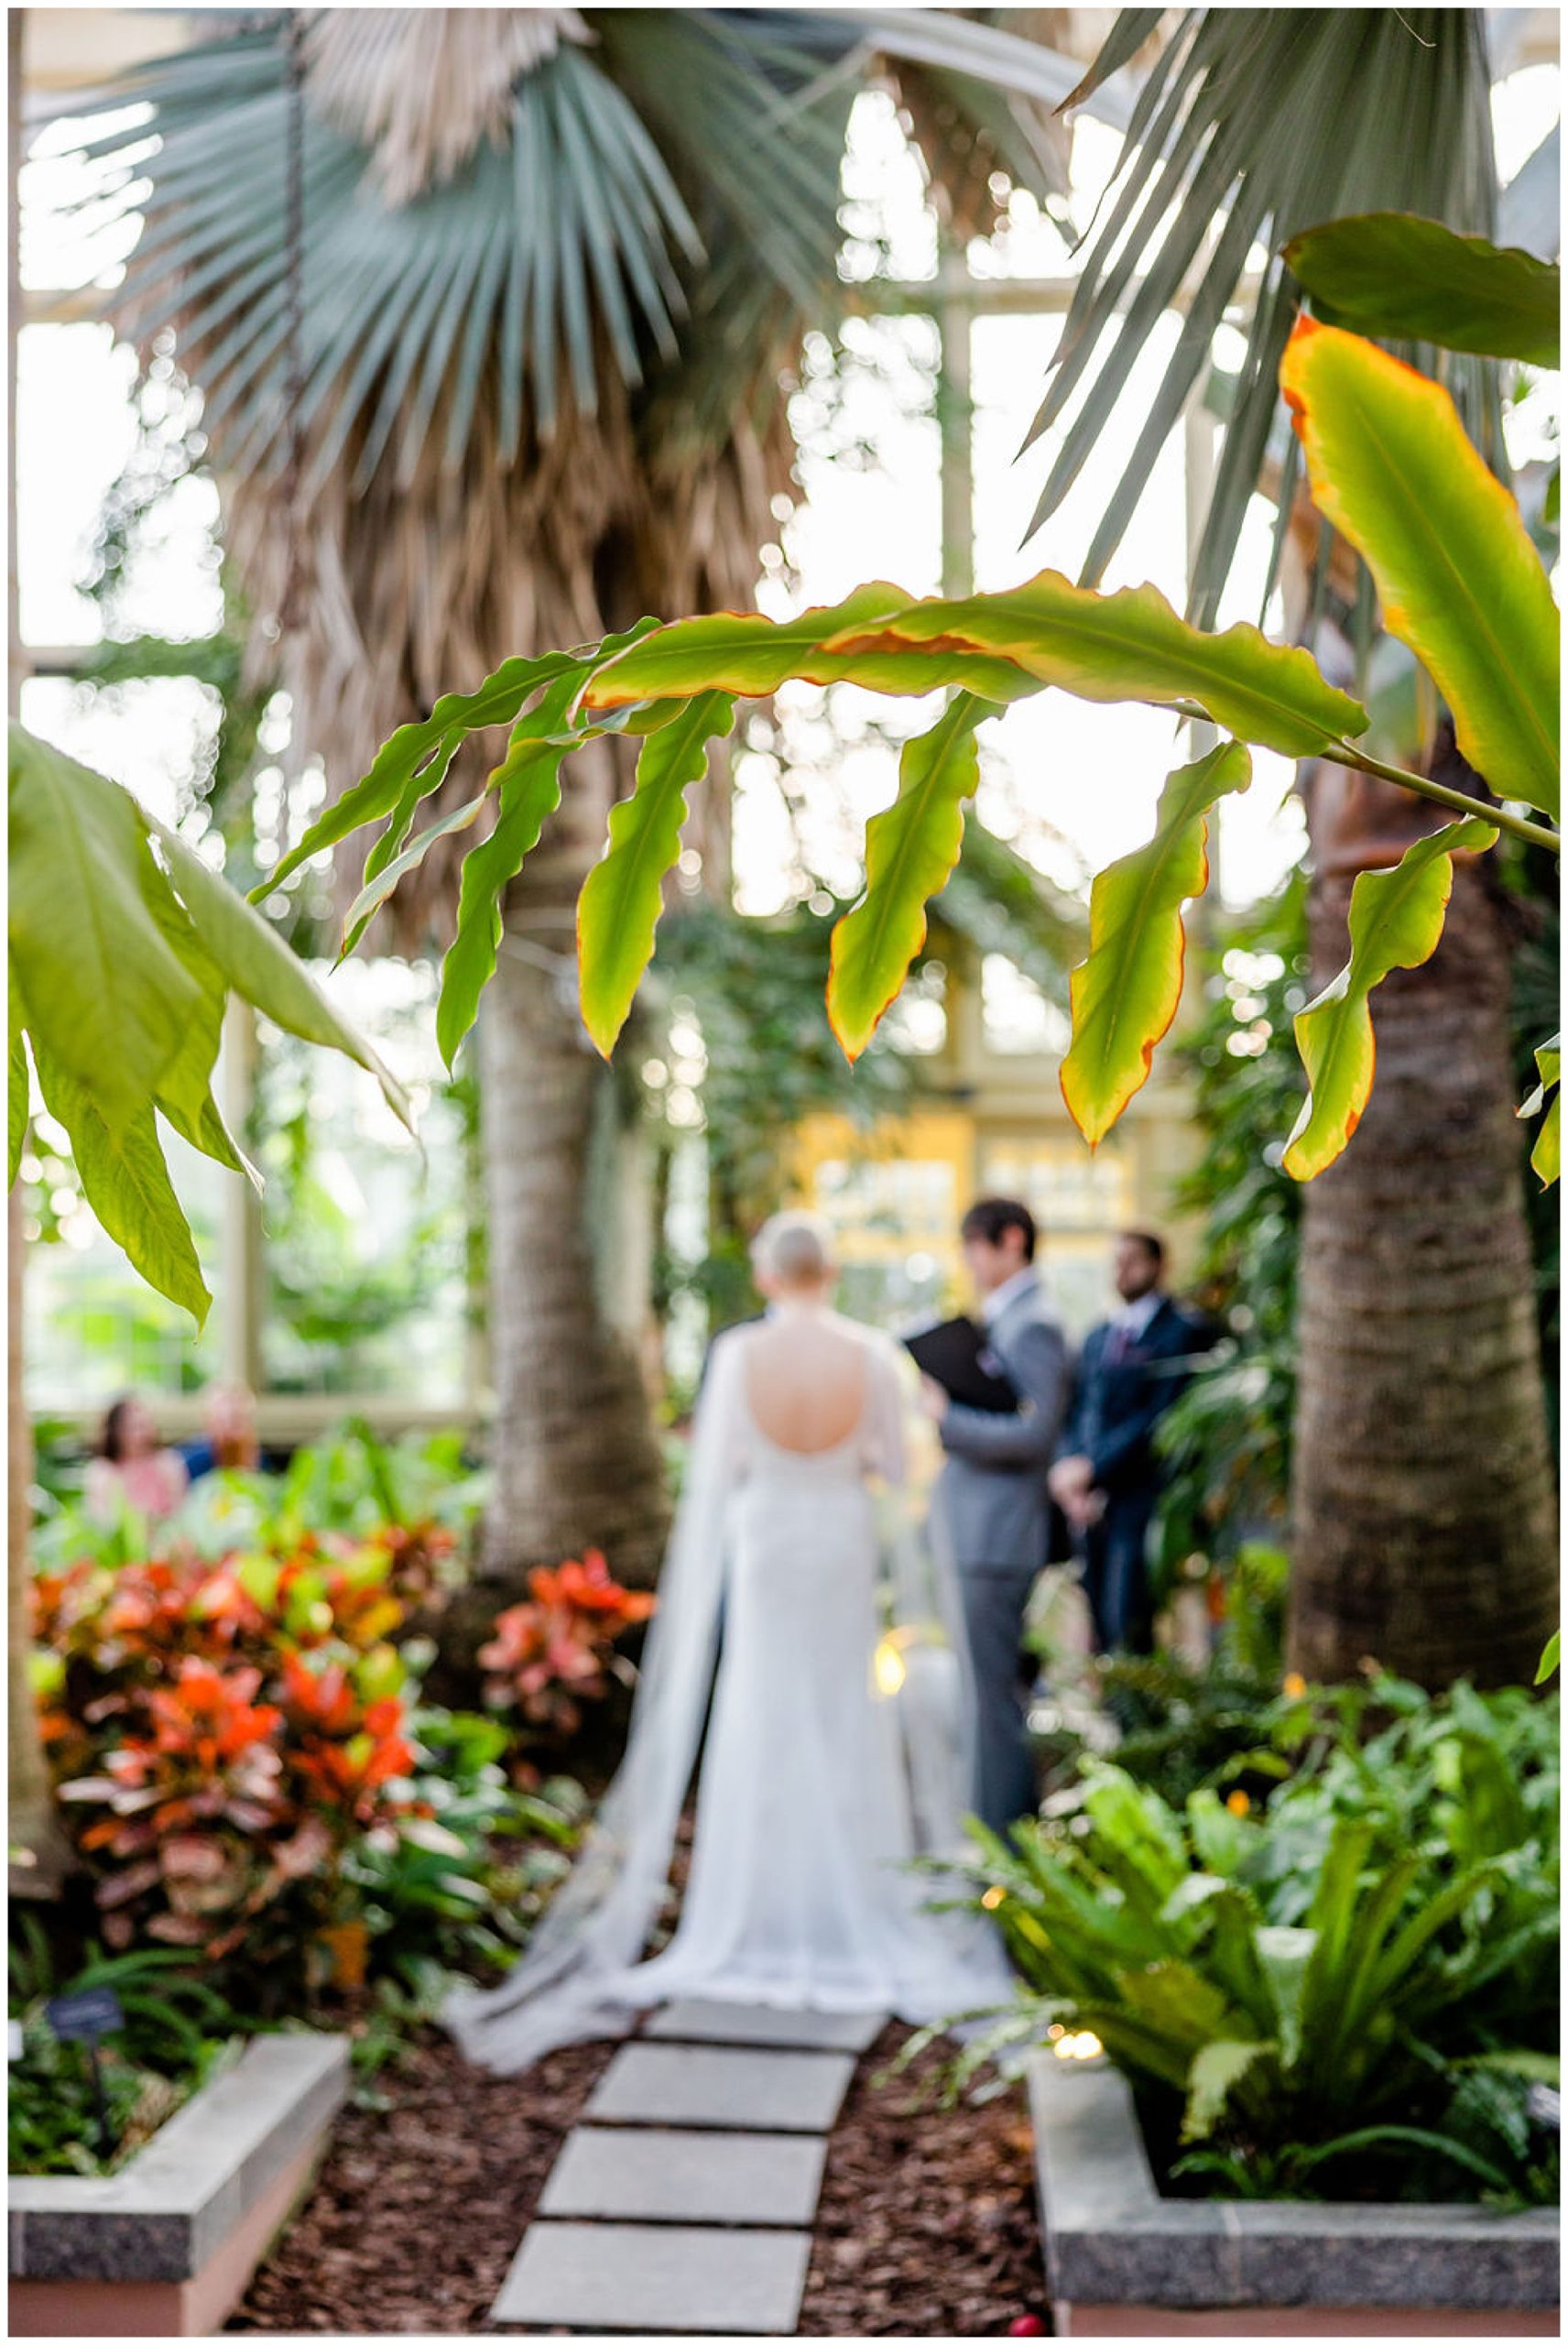 ethereal Rawlings Conservatory wedding, Baltimore wedding venues, Baltimore wedding photographer, Baltimore micro-wedding, Baltimore wedding photography, autumn wedding aesthetic, botanical gardens wedding, Baltimore botanical garden wedding, DC wedding photographer, Rachel E.H. Photography, couple at alter, blurred wedding picture, couple at alter under palm trees, BHLDN wedding dress